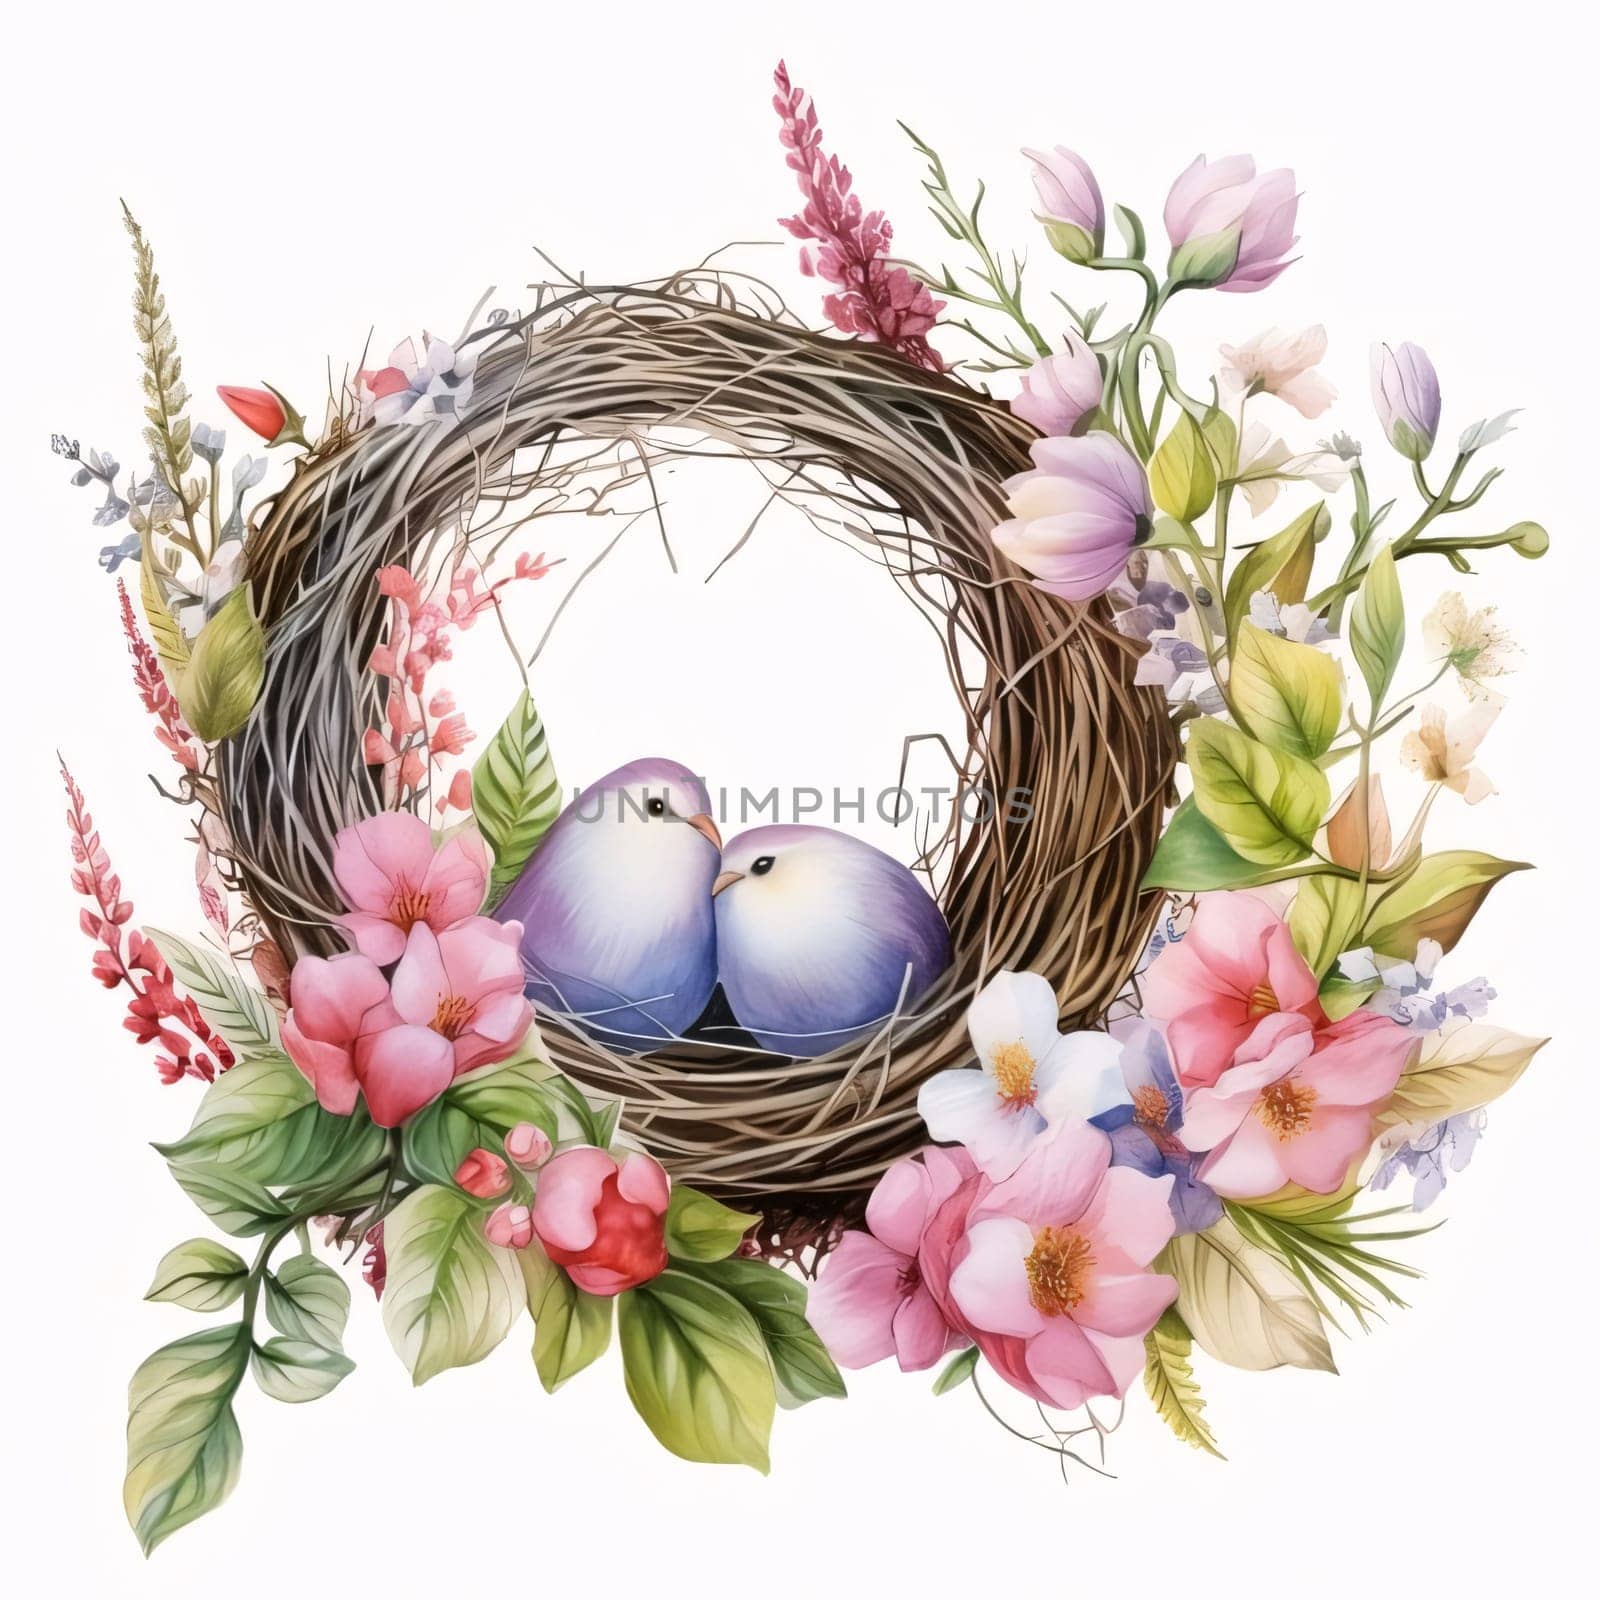 Loving Birds Nestled in Floral Wreath Illustration by ThemesS